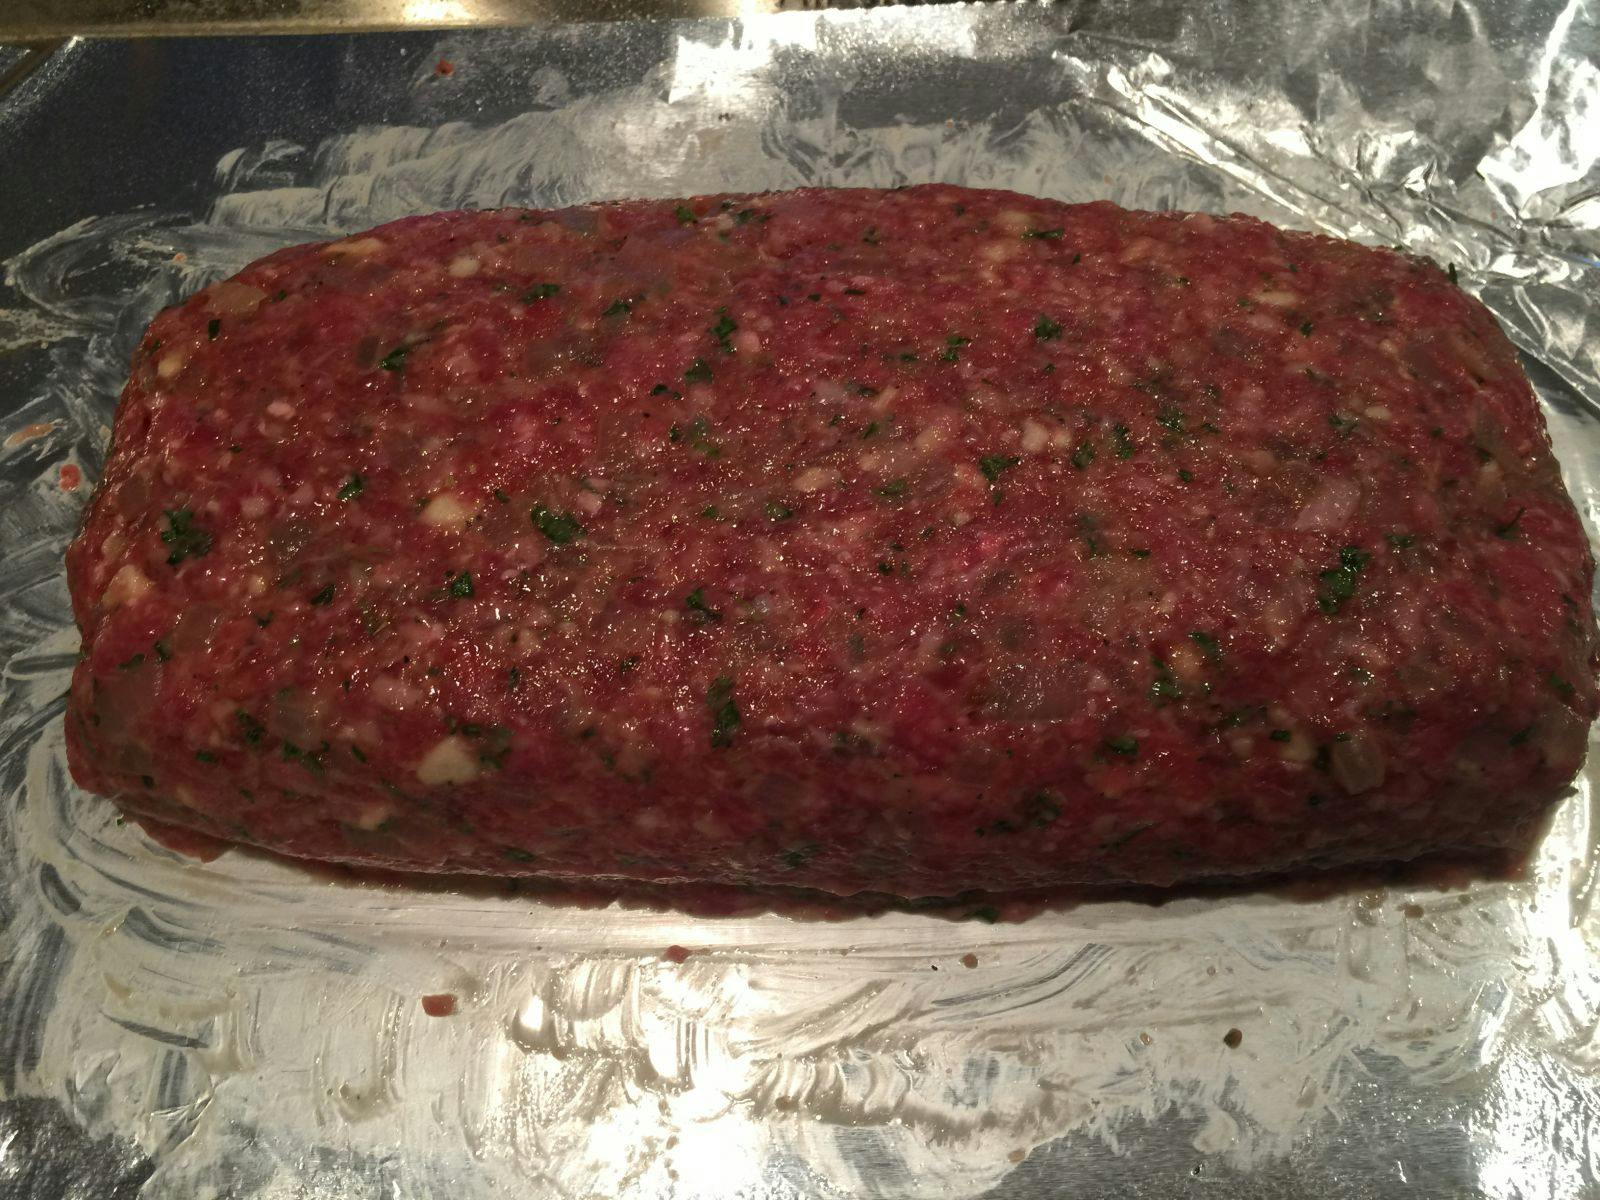 Place the meatloaf on the grill